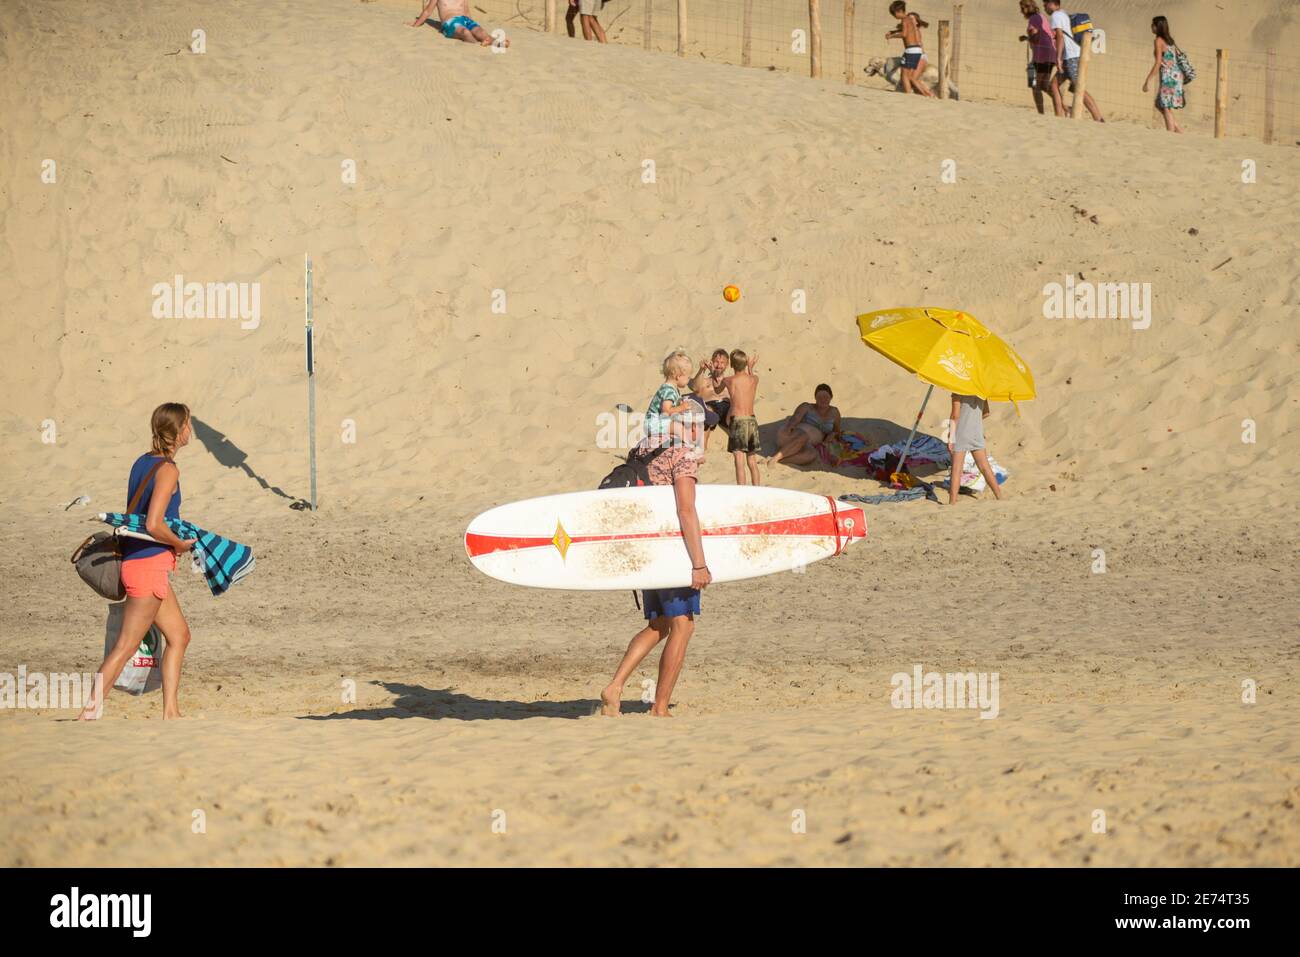 Man with surfboard leaving the beach with his family in Biscarrosse.Biscarrosse Plage is an important surf destination on the Atlantic Ocean in France Stock Photo